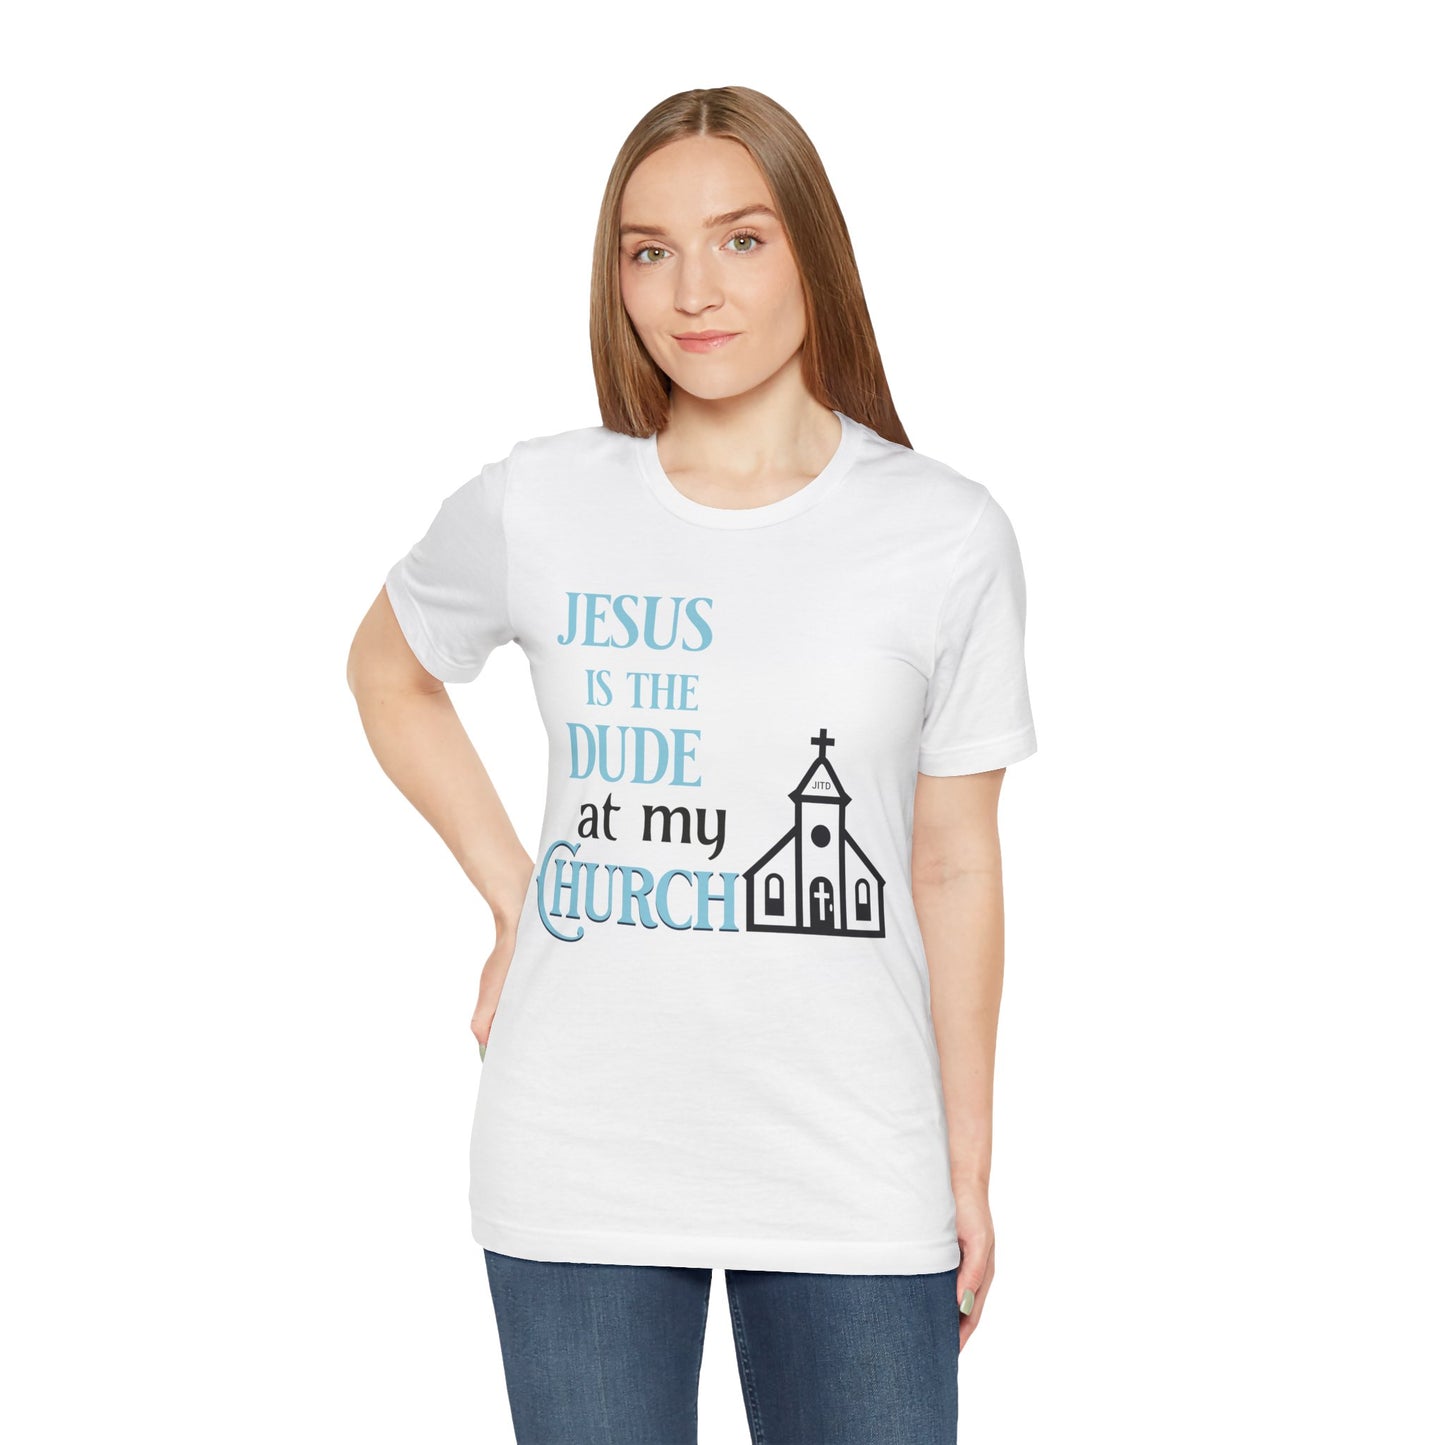 JESUS IS THE DUDE "AT MY CHURCH" UNISEX TEE